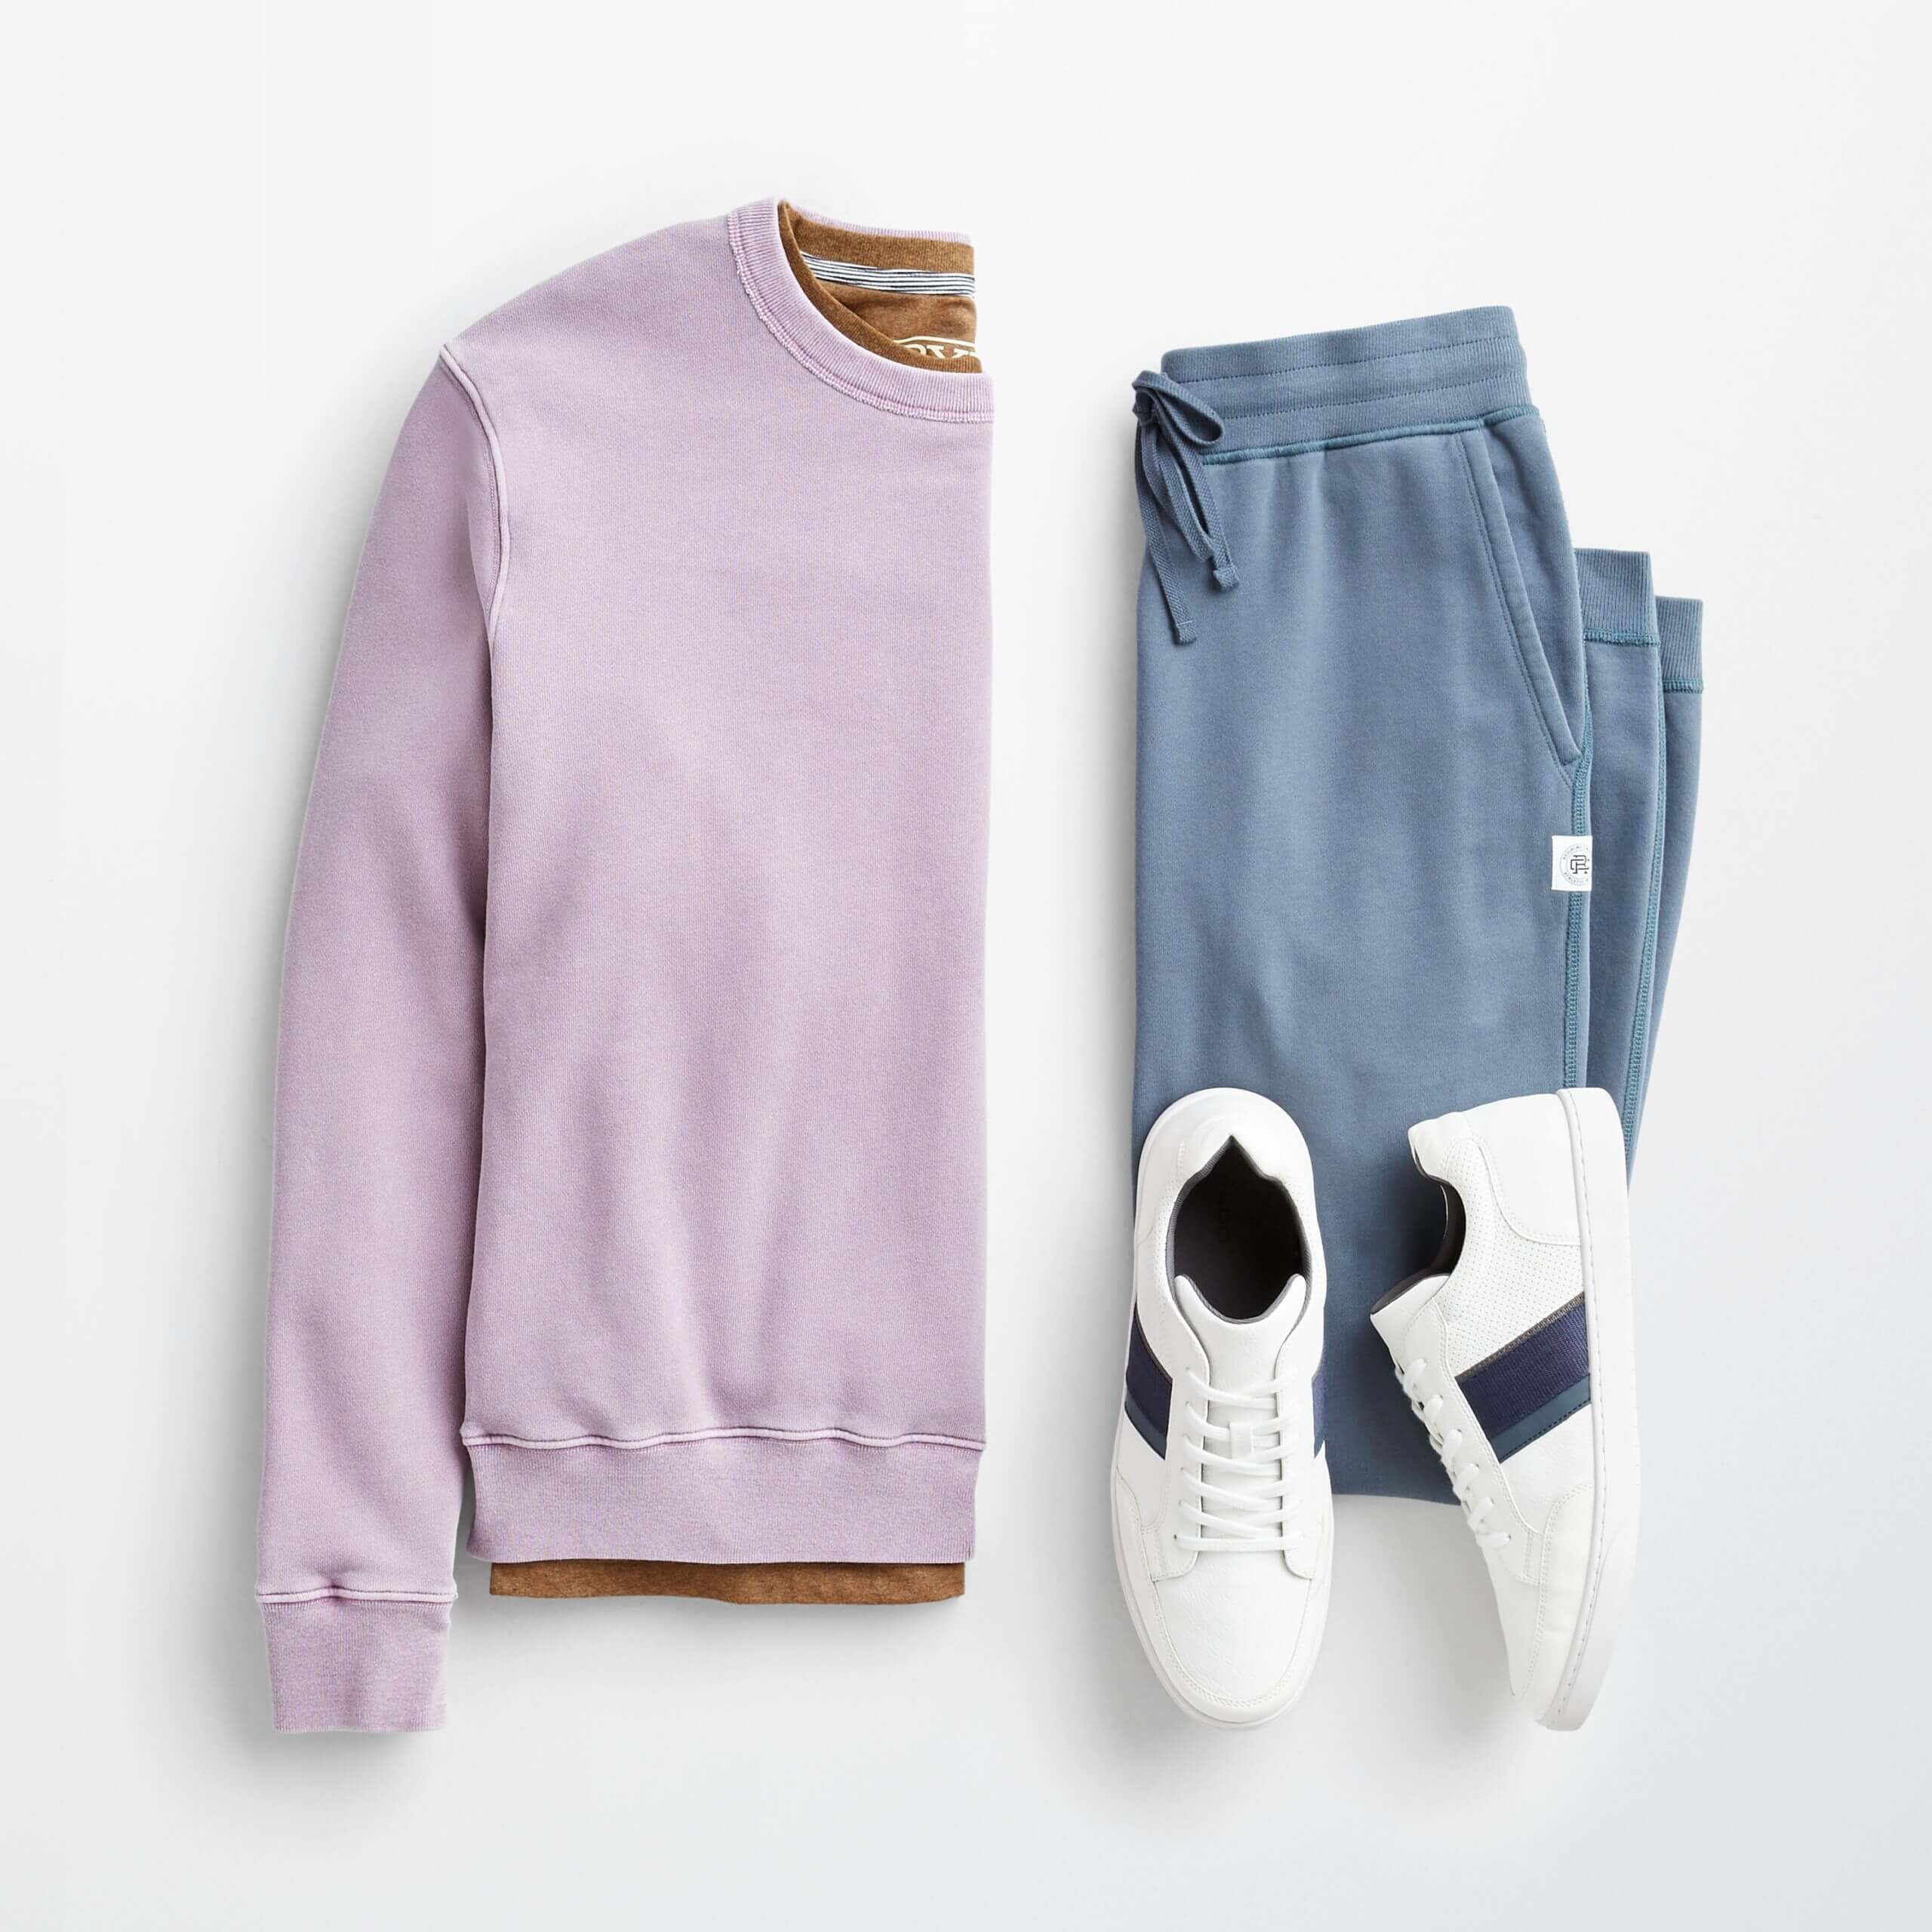 Stitch Fix Men’s summer trends outfit featuring blue joggers, brown crew neck tee, purple sweatshirt and white and blue sneakers.